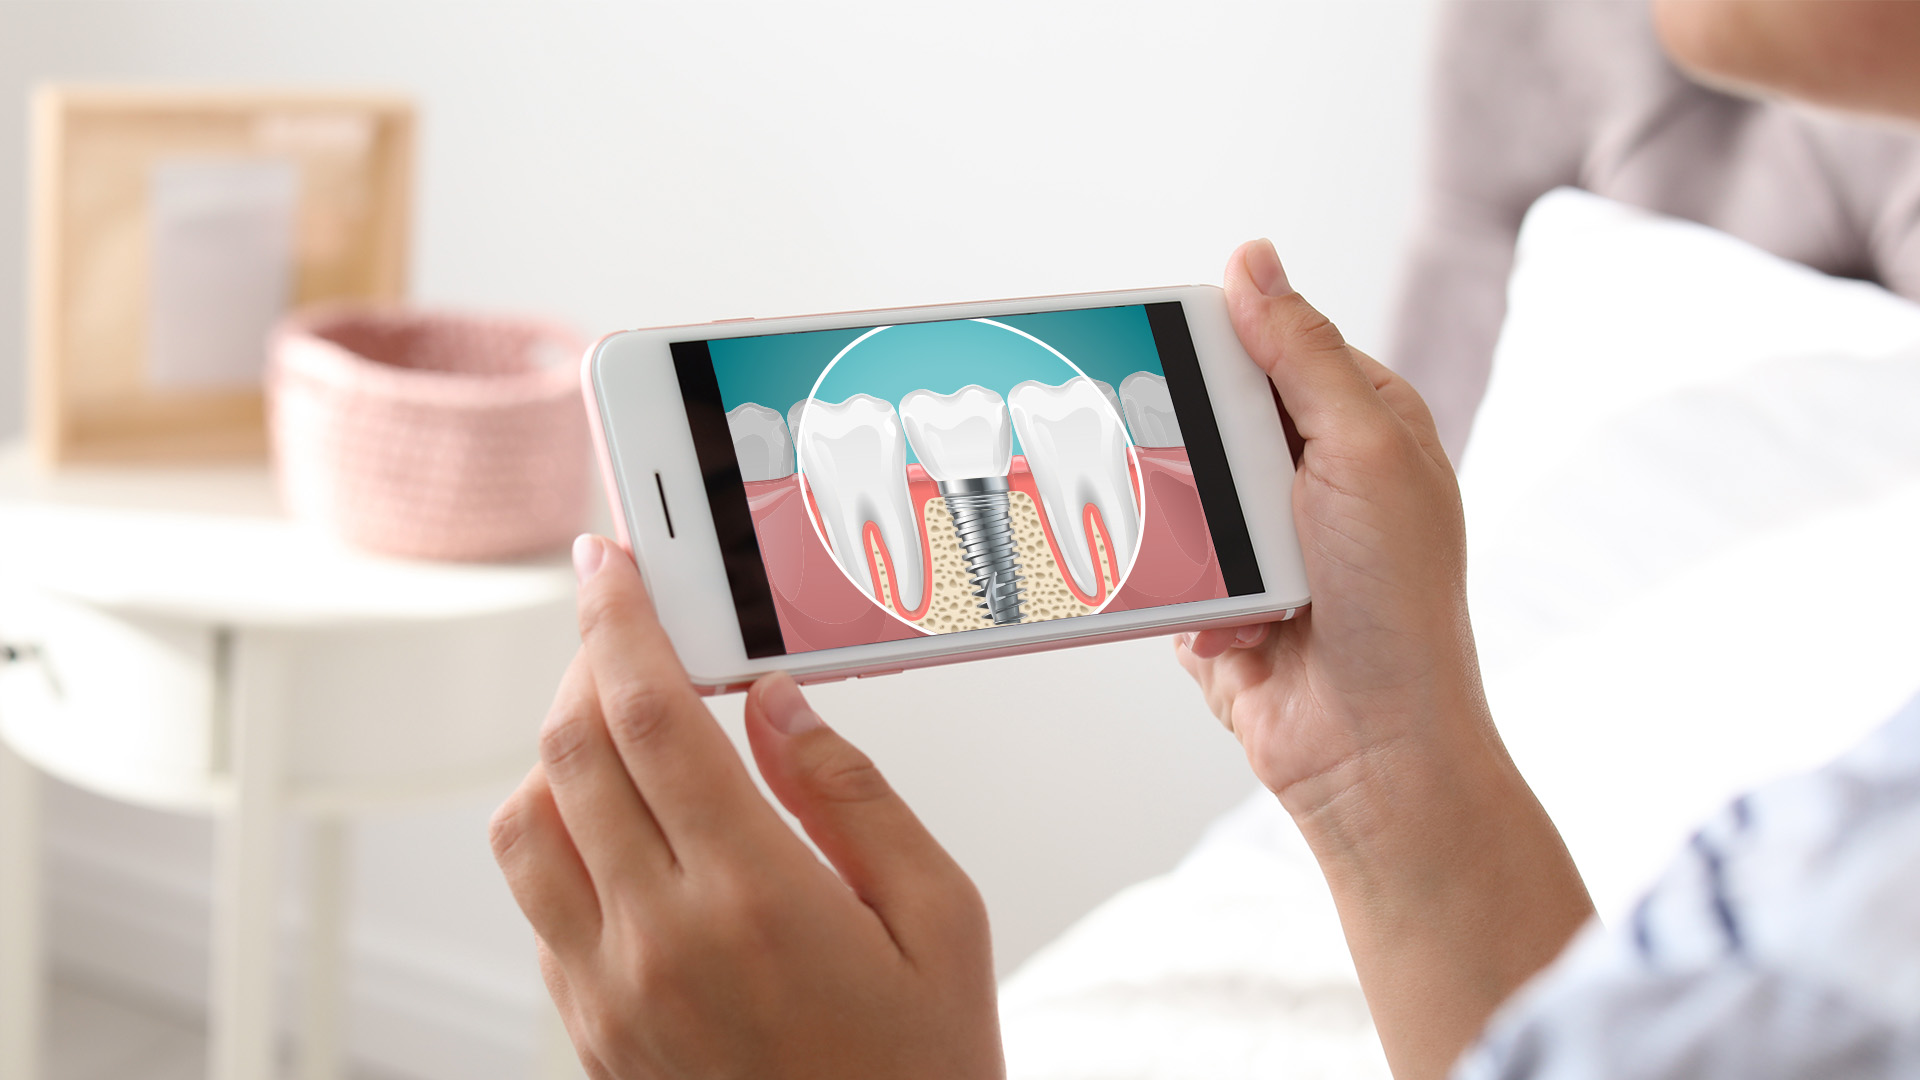 Person holding a smartphone displaying an image of a tooth with a cavity and gum disease, showcasing oral health care.